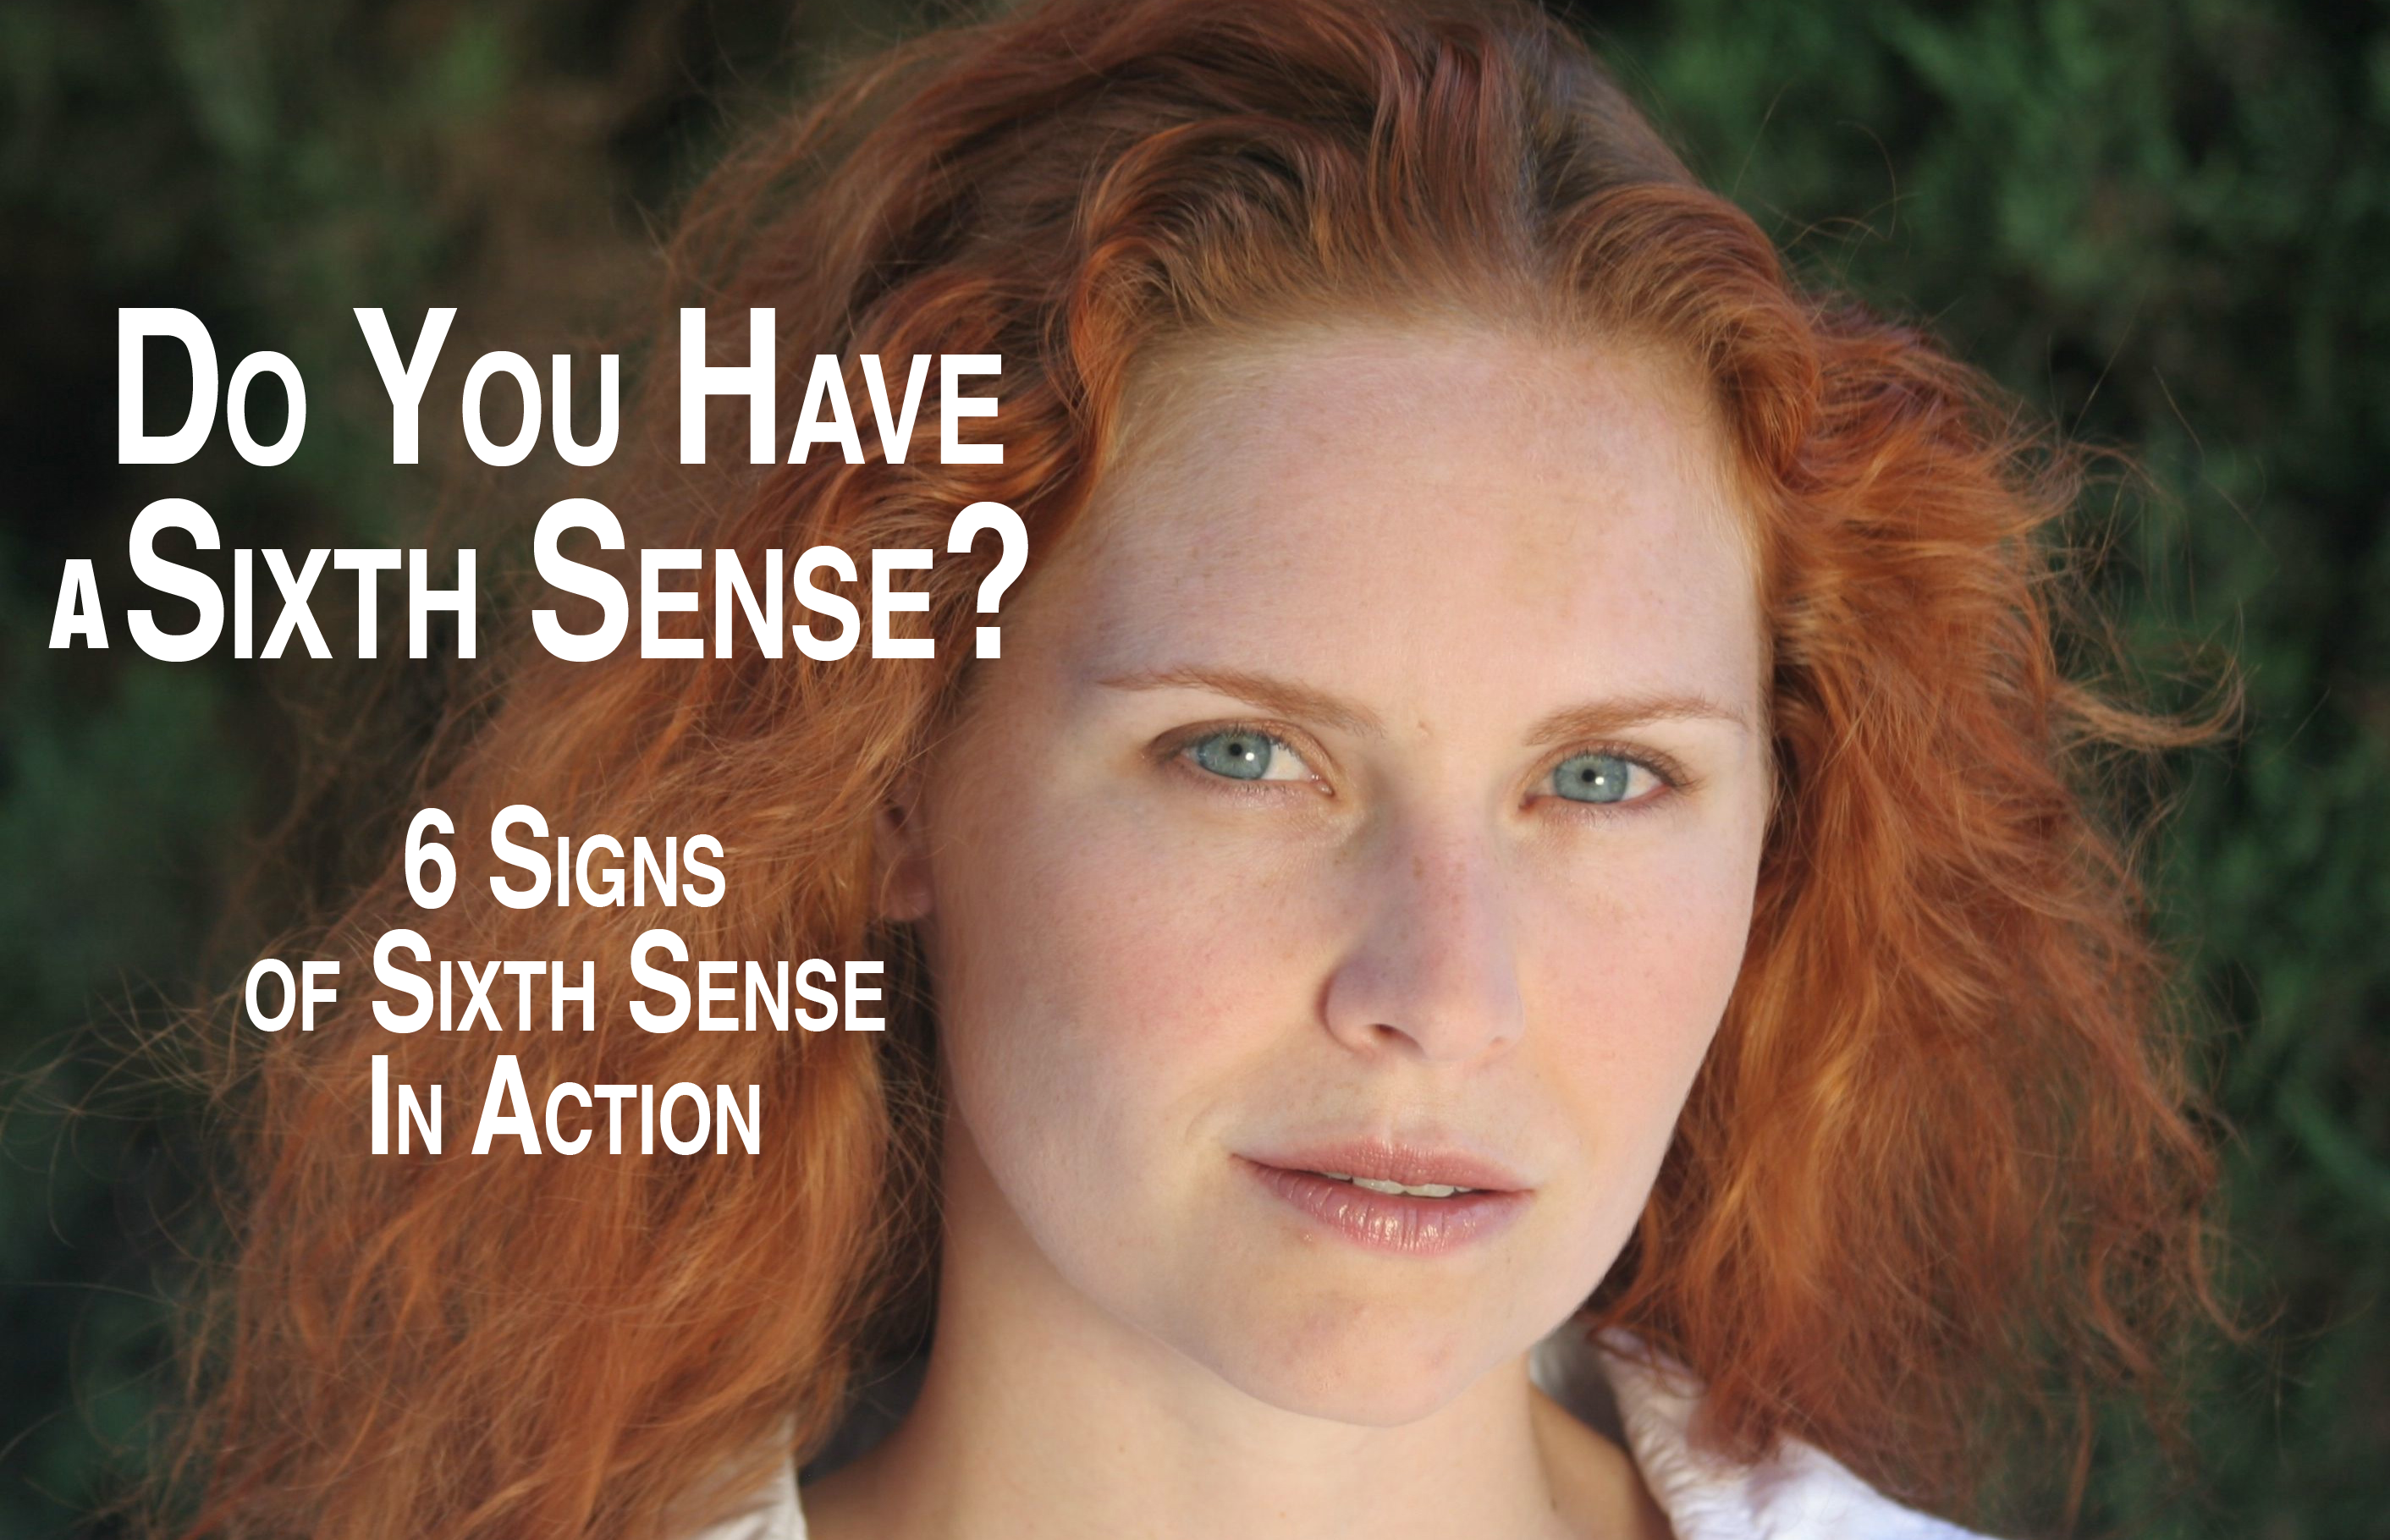 6 Signs of Sixth Sense In Action